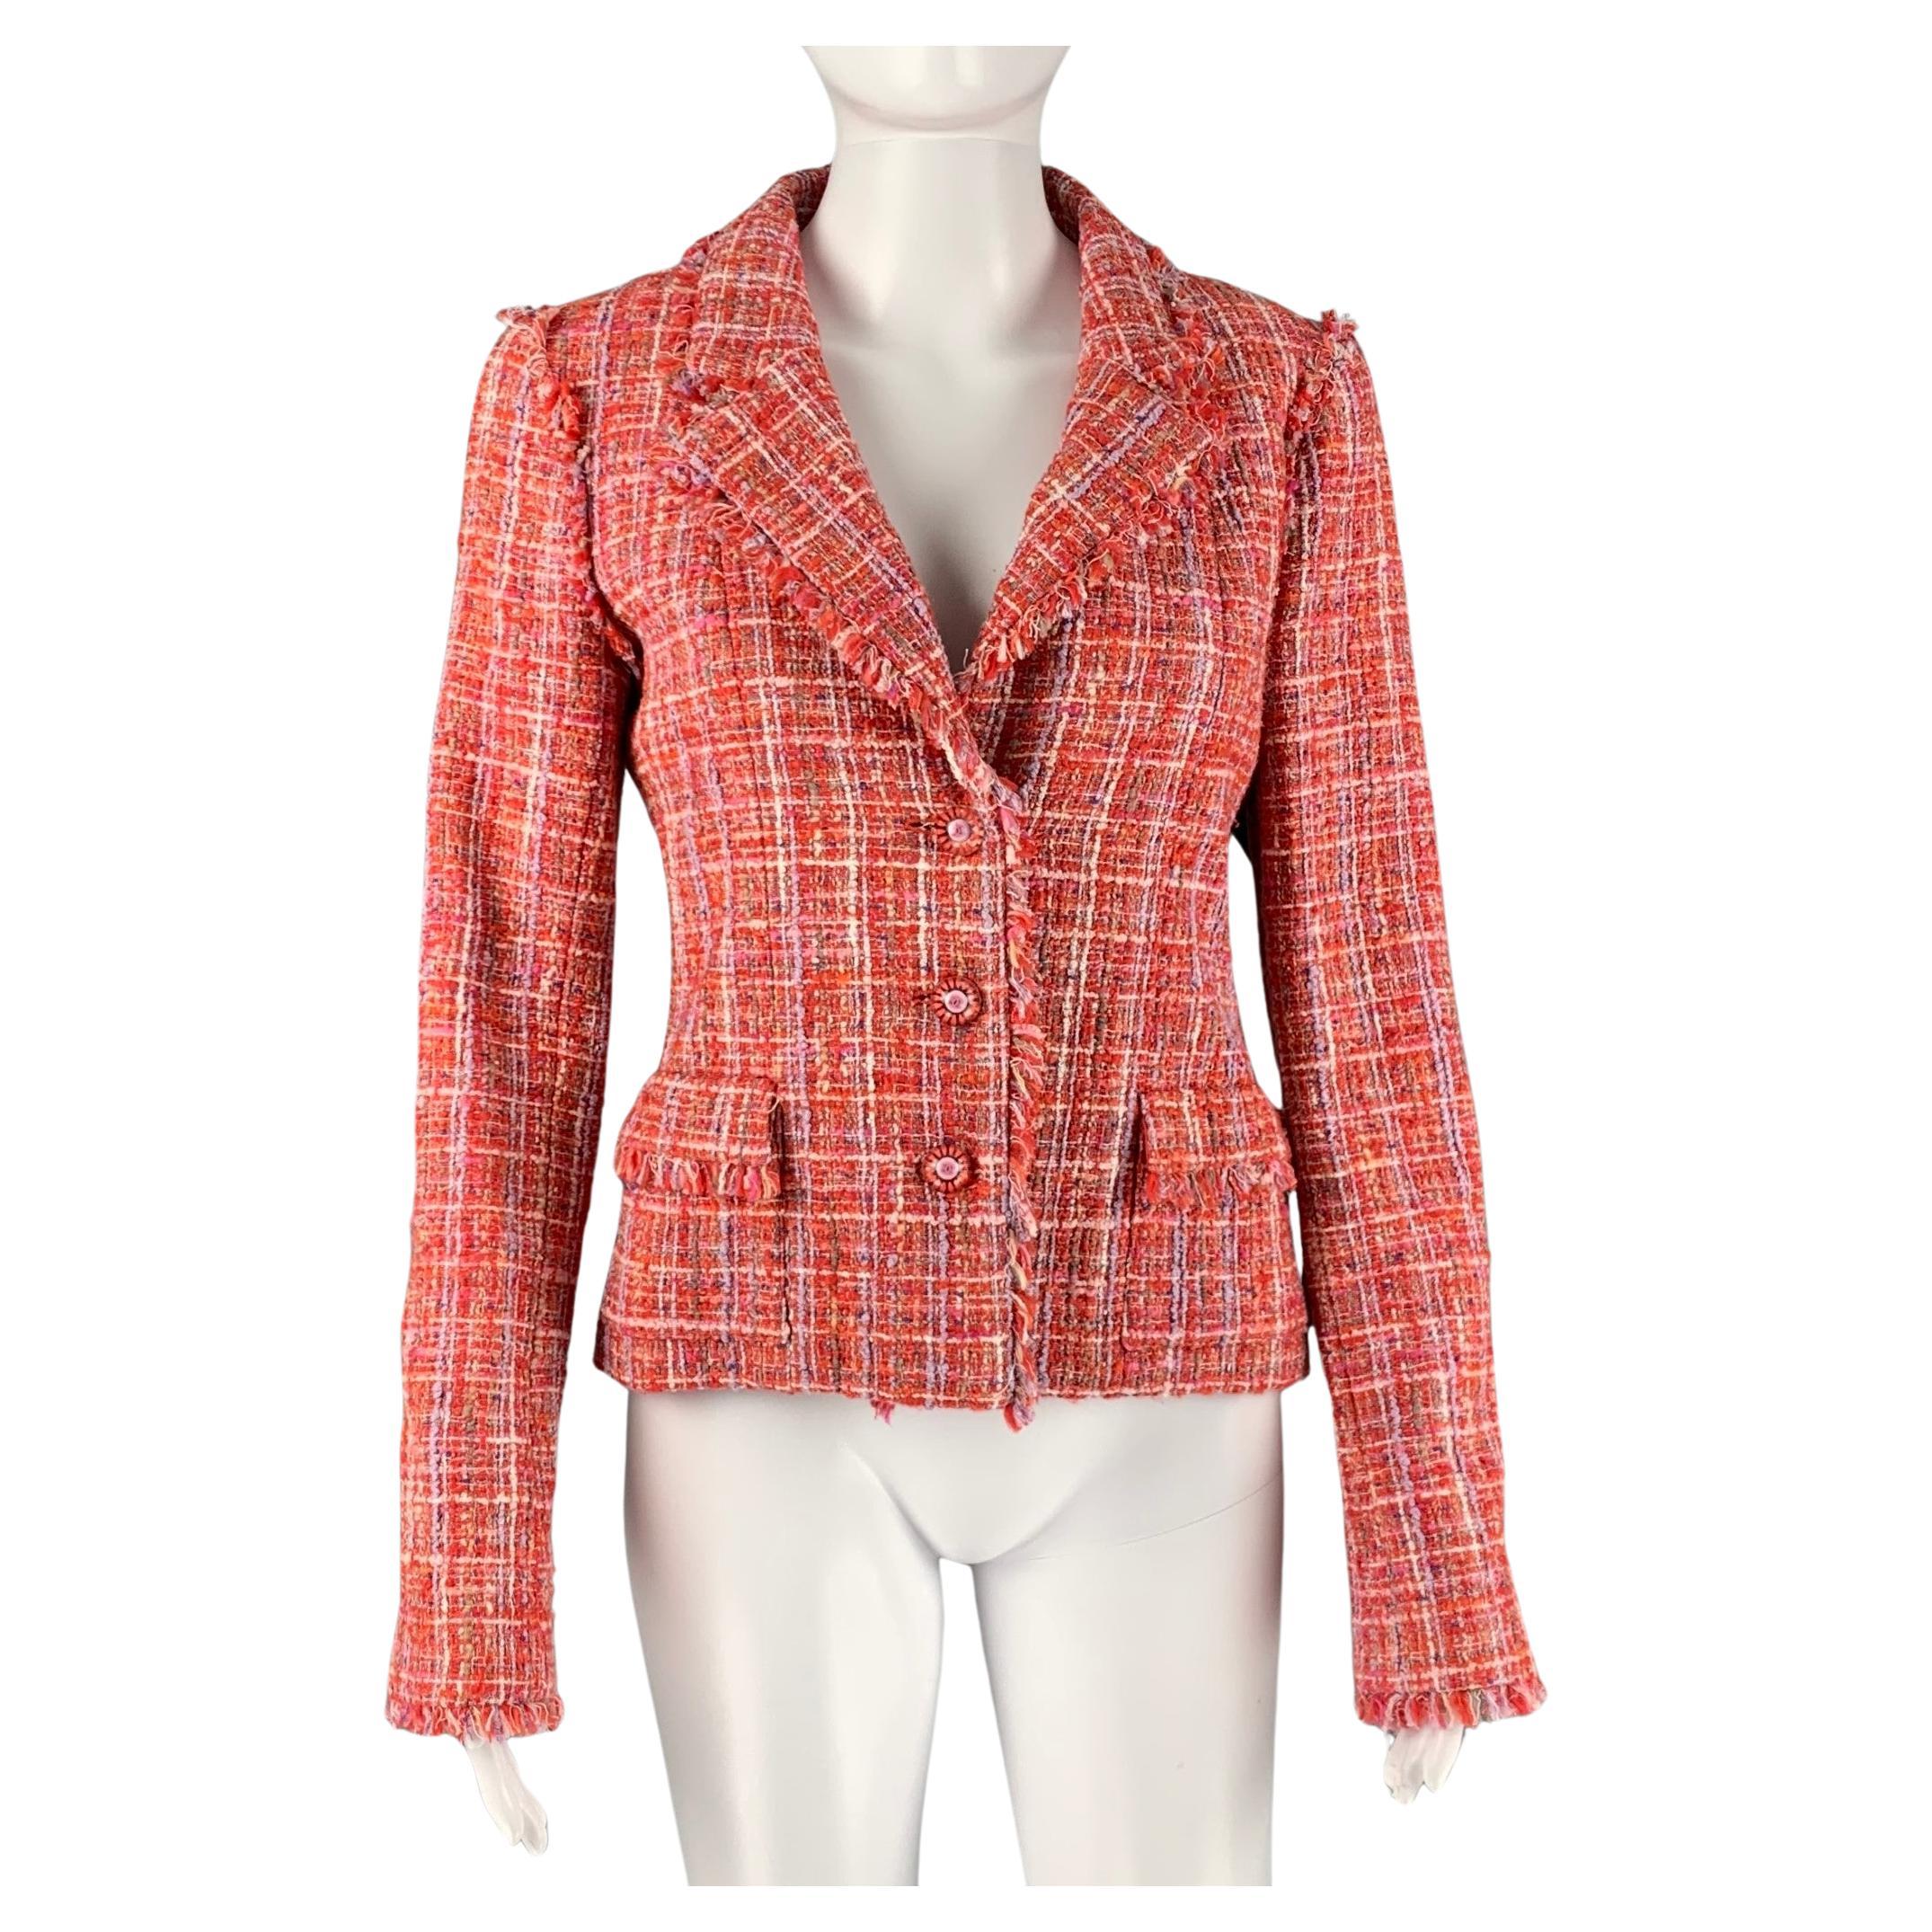 CHANEL P23159V13825 Size 4 Red White Cotton Blend Single breasted Jacket